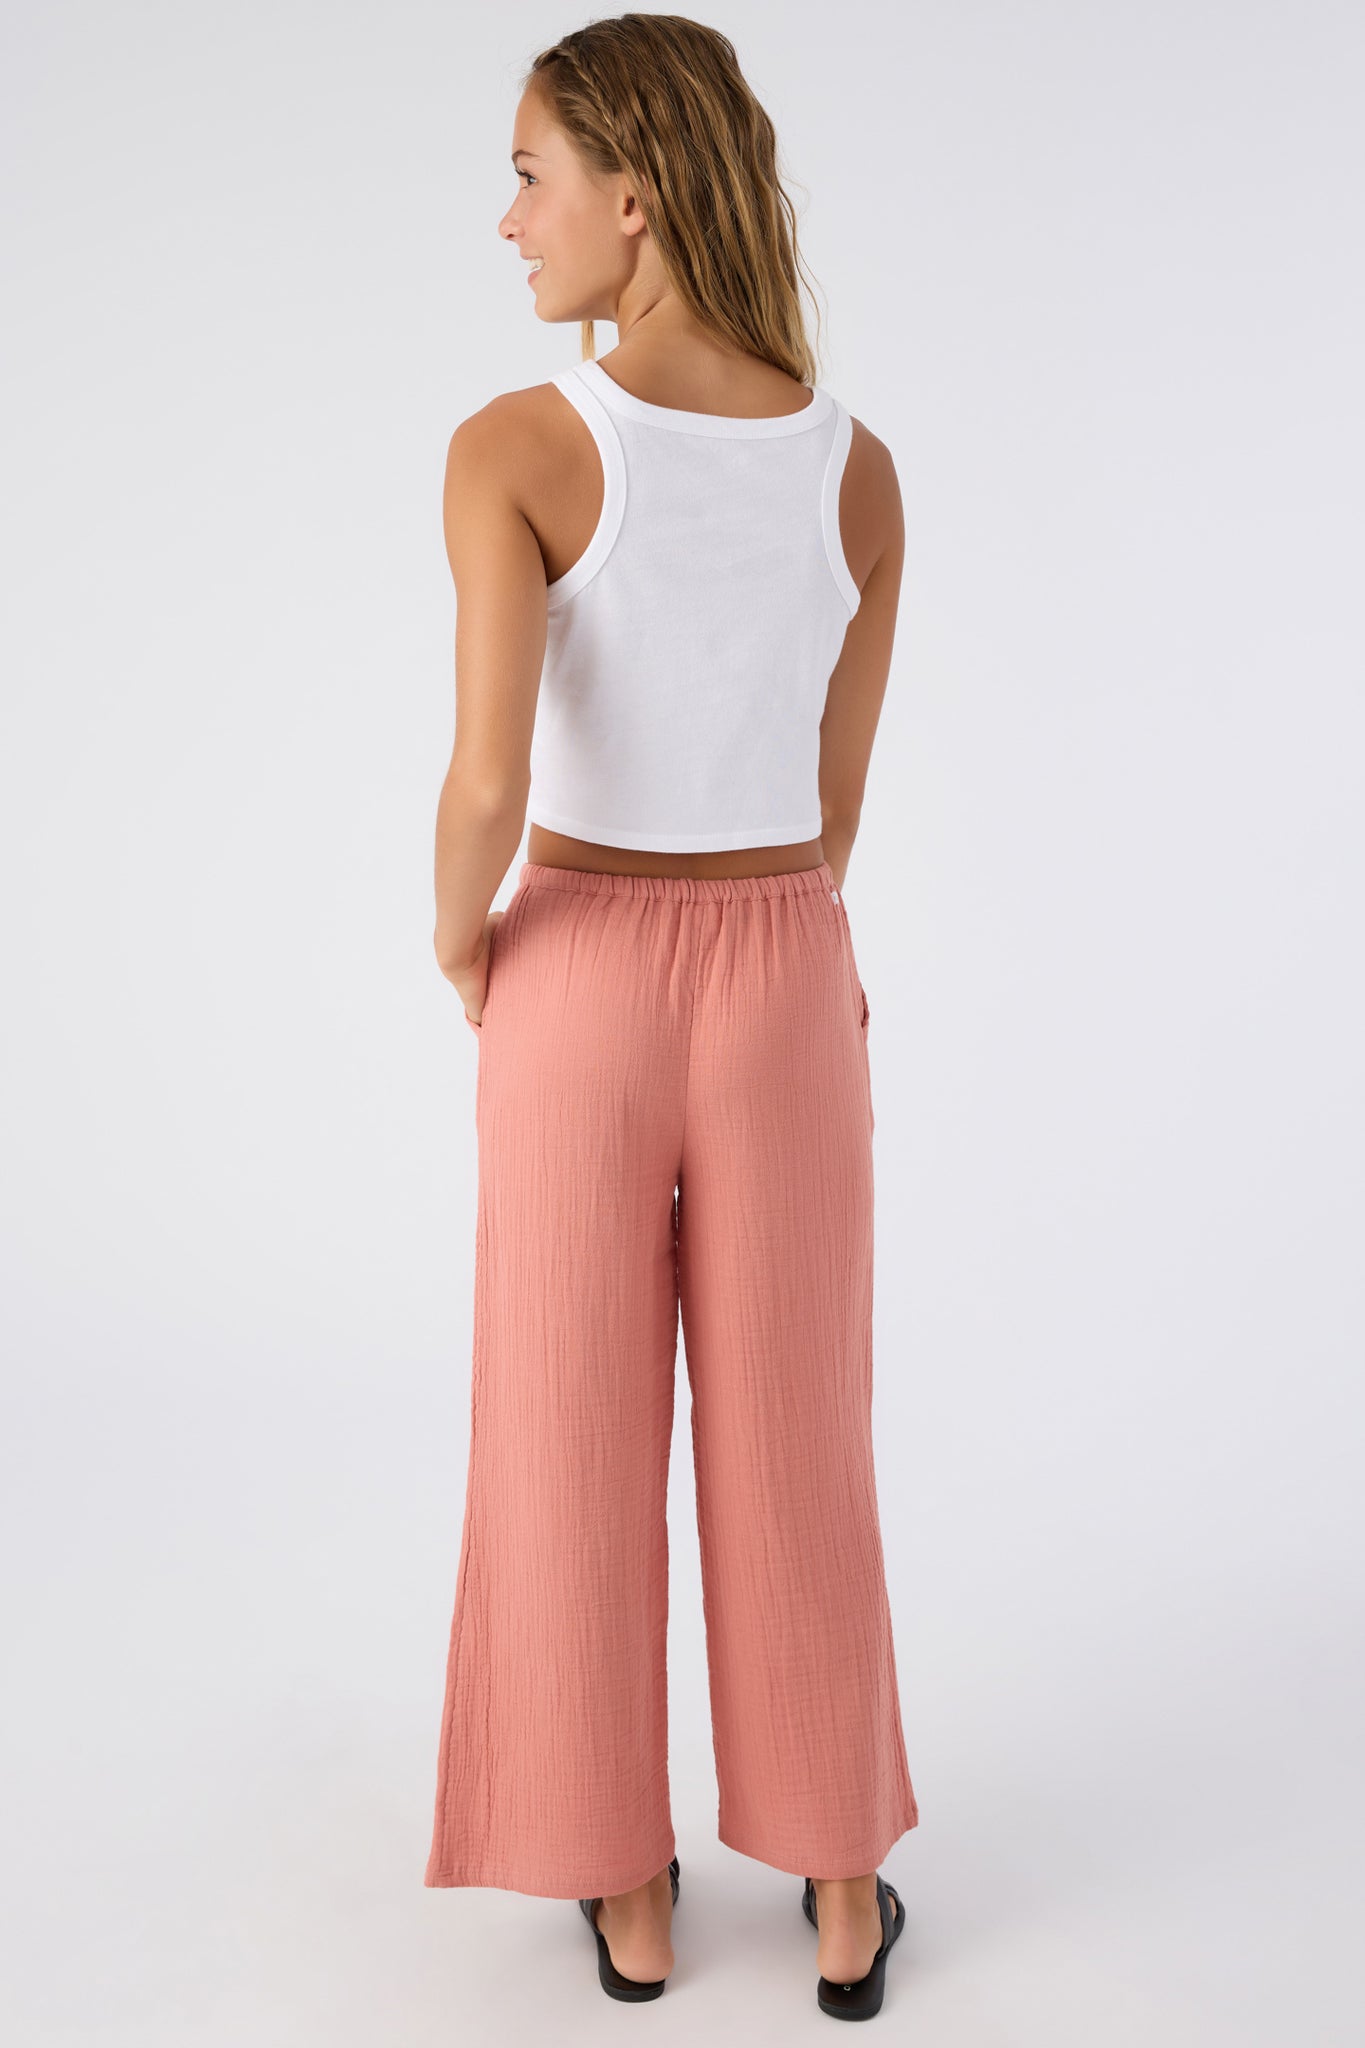 By Anthropologie Wide-Leg Smocked Gauze Pants | Anthropologie Japan -  Women's Clothing, Accessories & Home